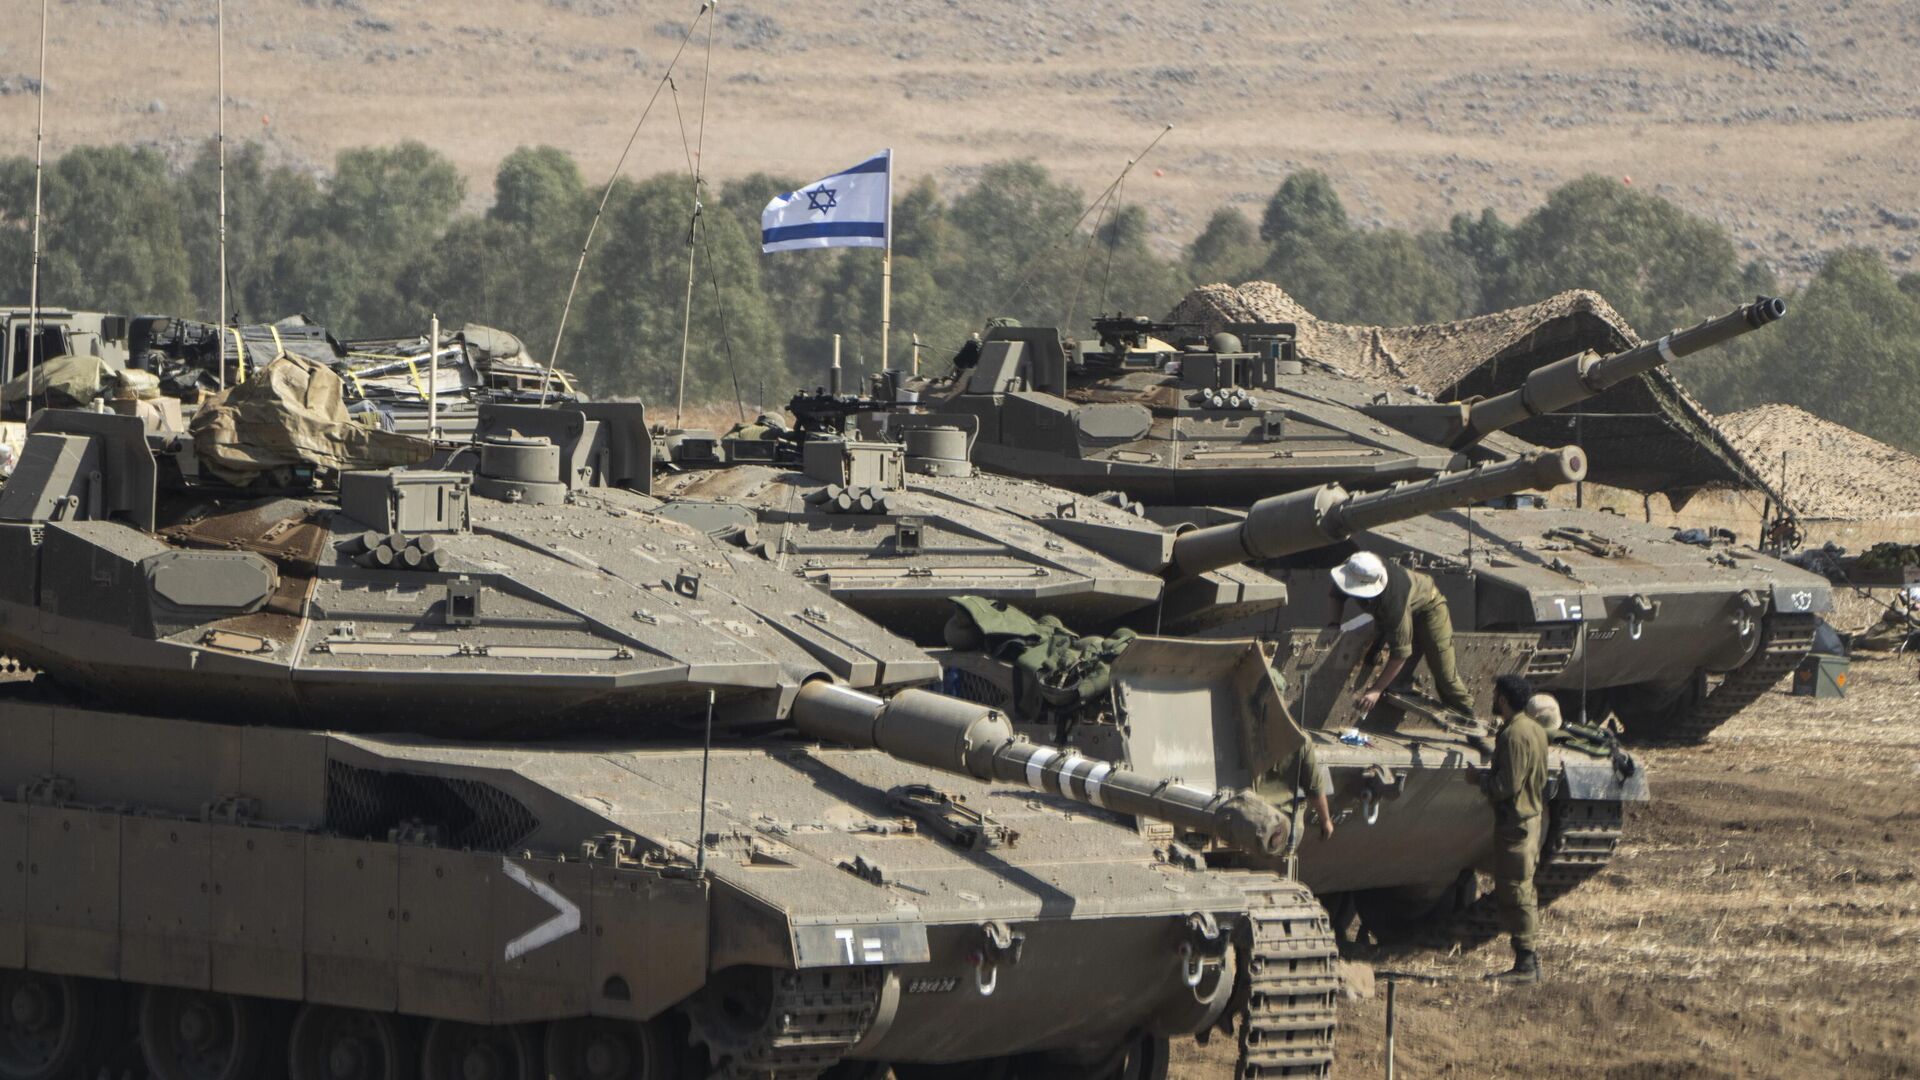 Israeli army announced that ten rockets were launched from Lebanon